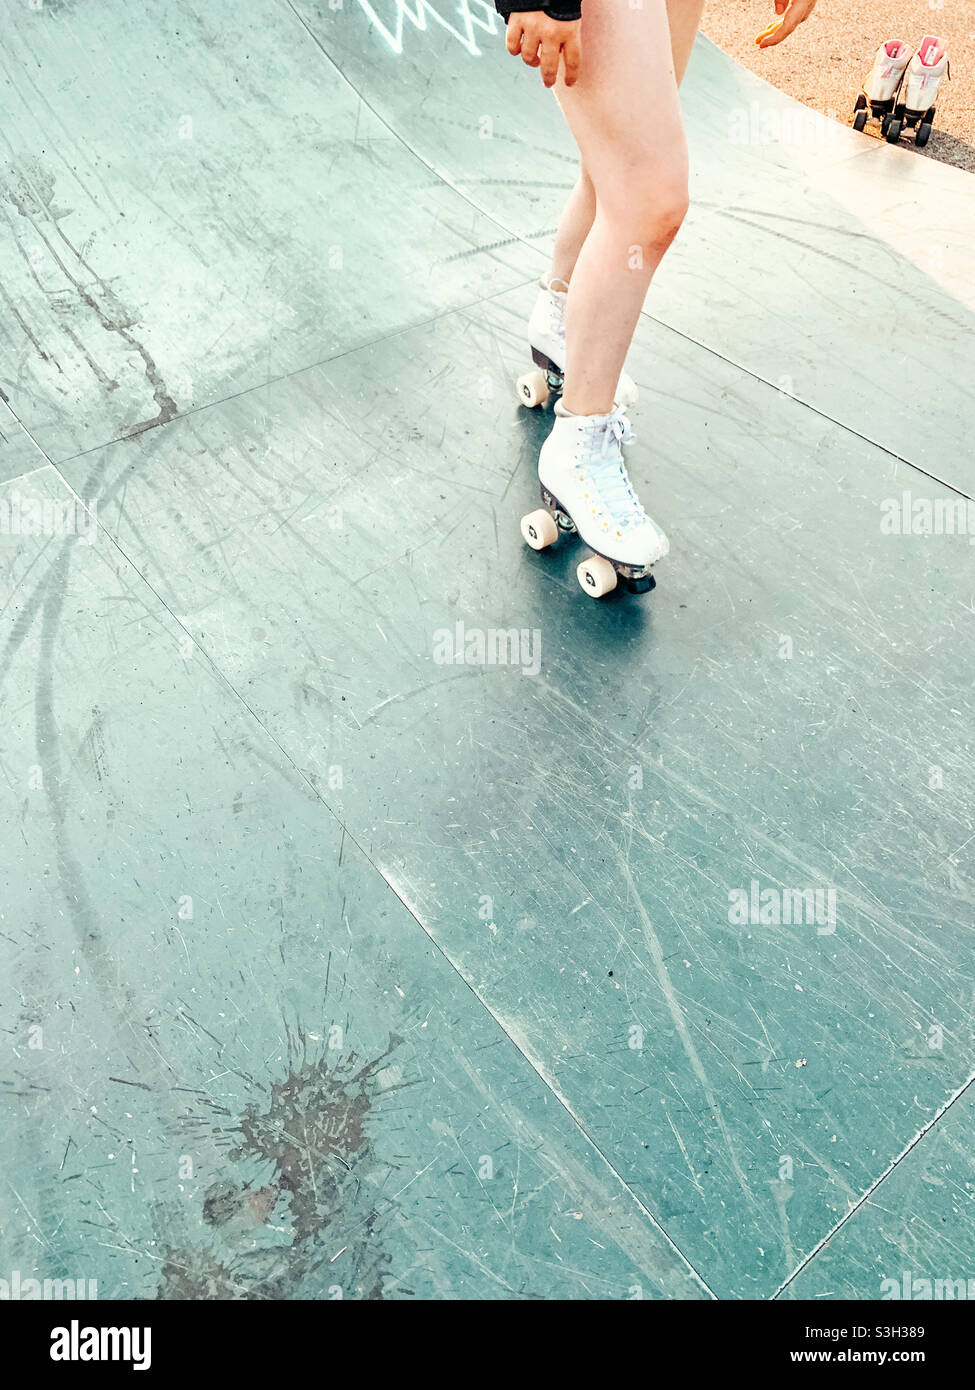 Young female roller skating on ramp Stock Photo